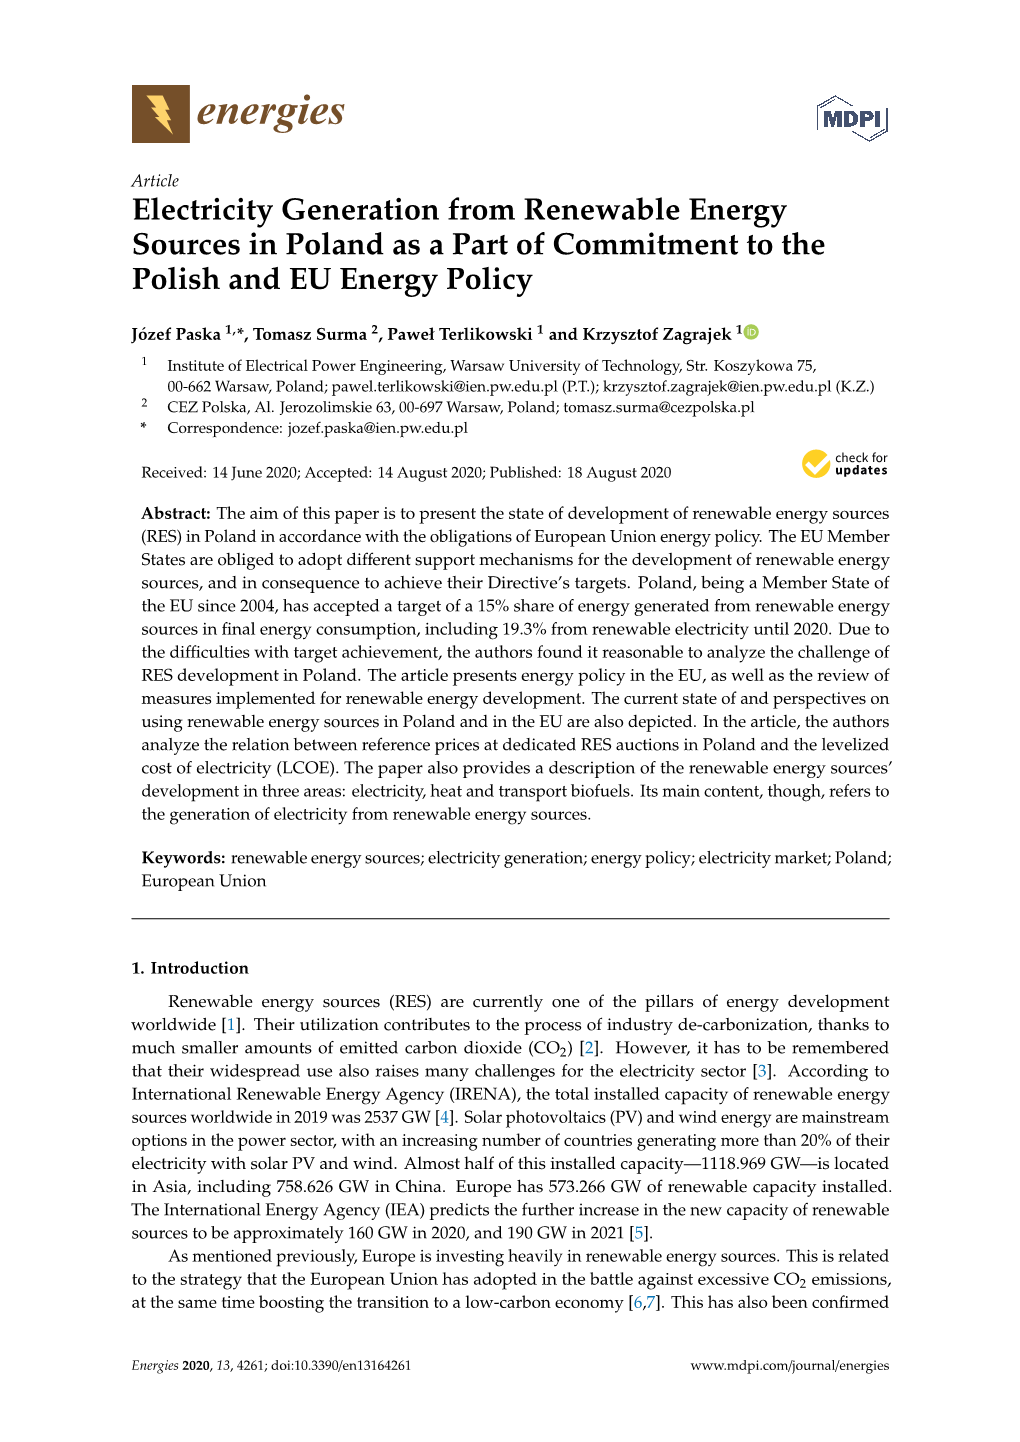 Electricity Generation from Renewable Energy Sources in Poland As a Part of Commitment to the Polish and EU Energy Policy